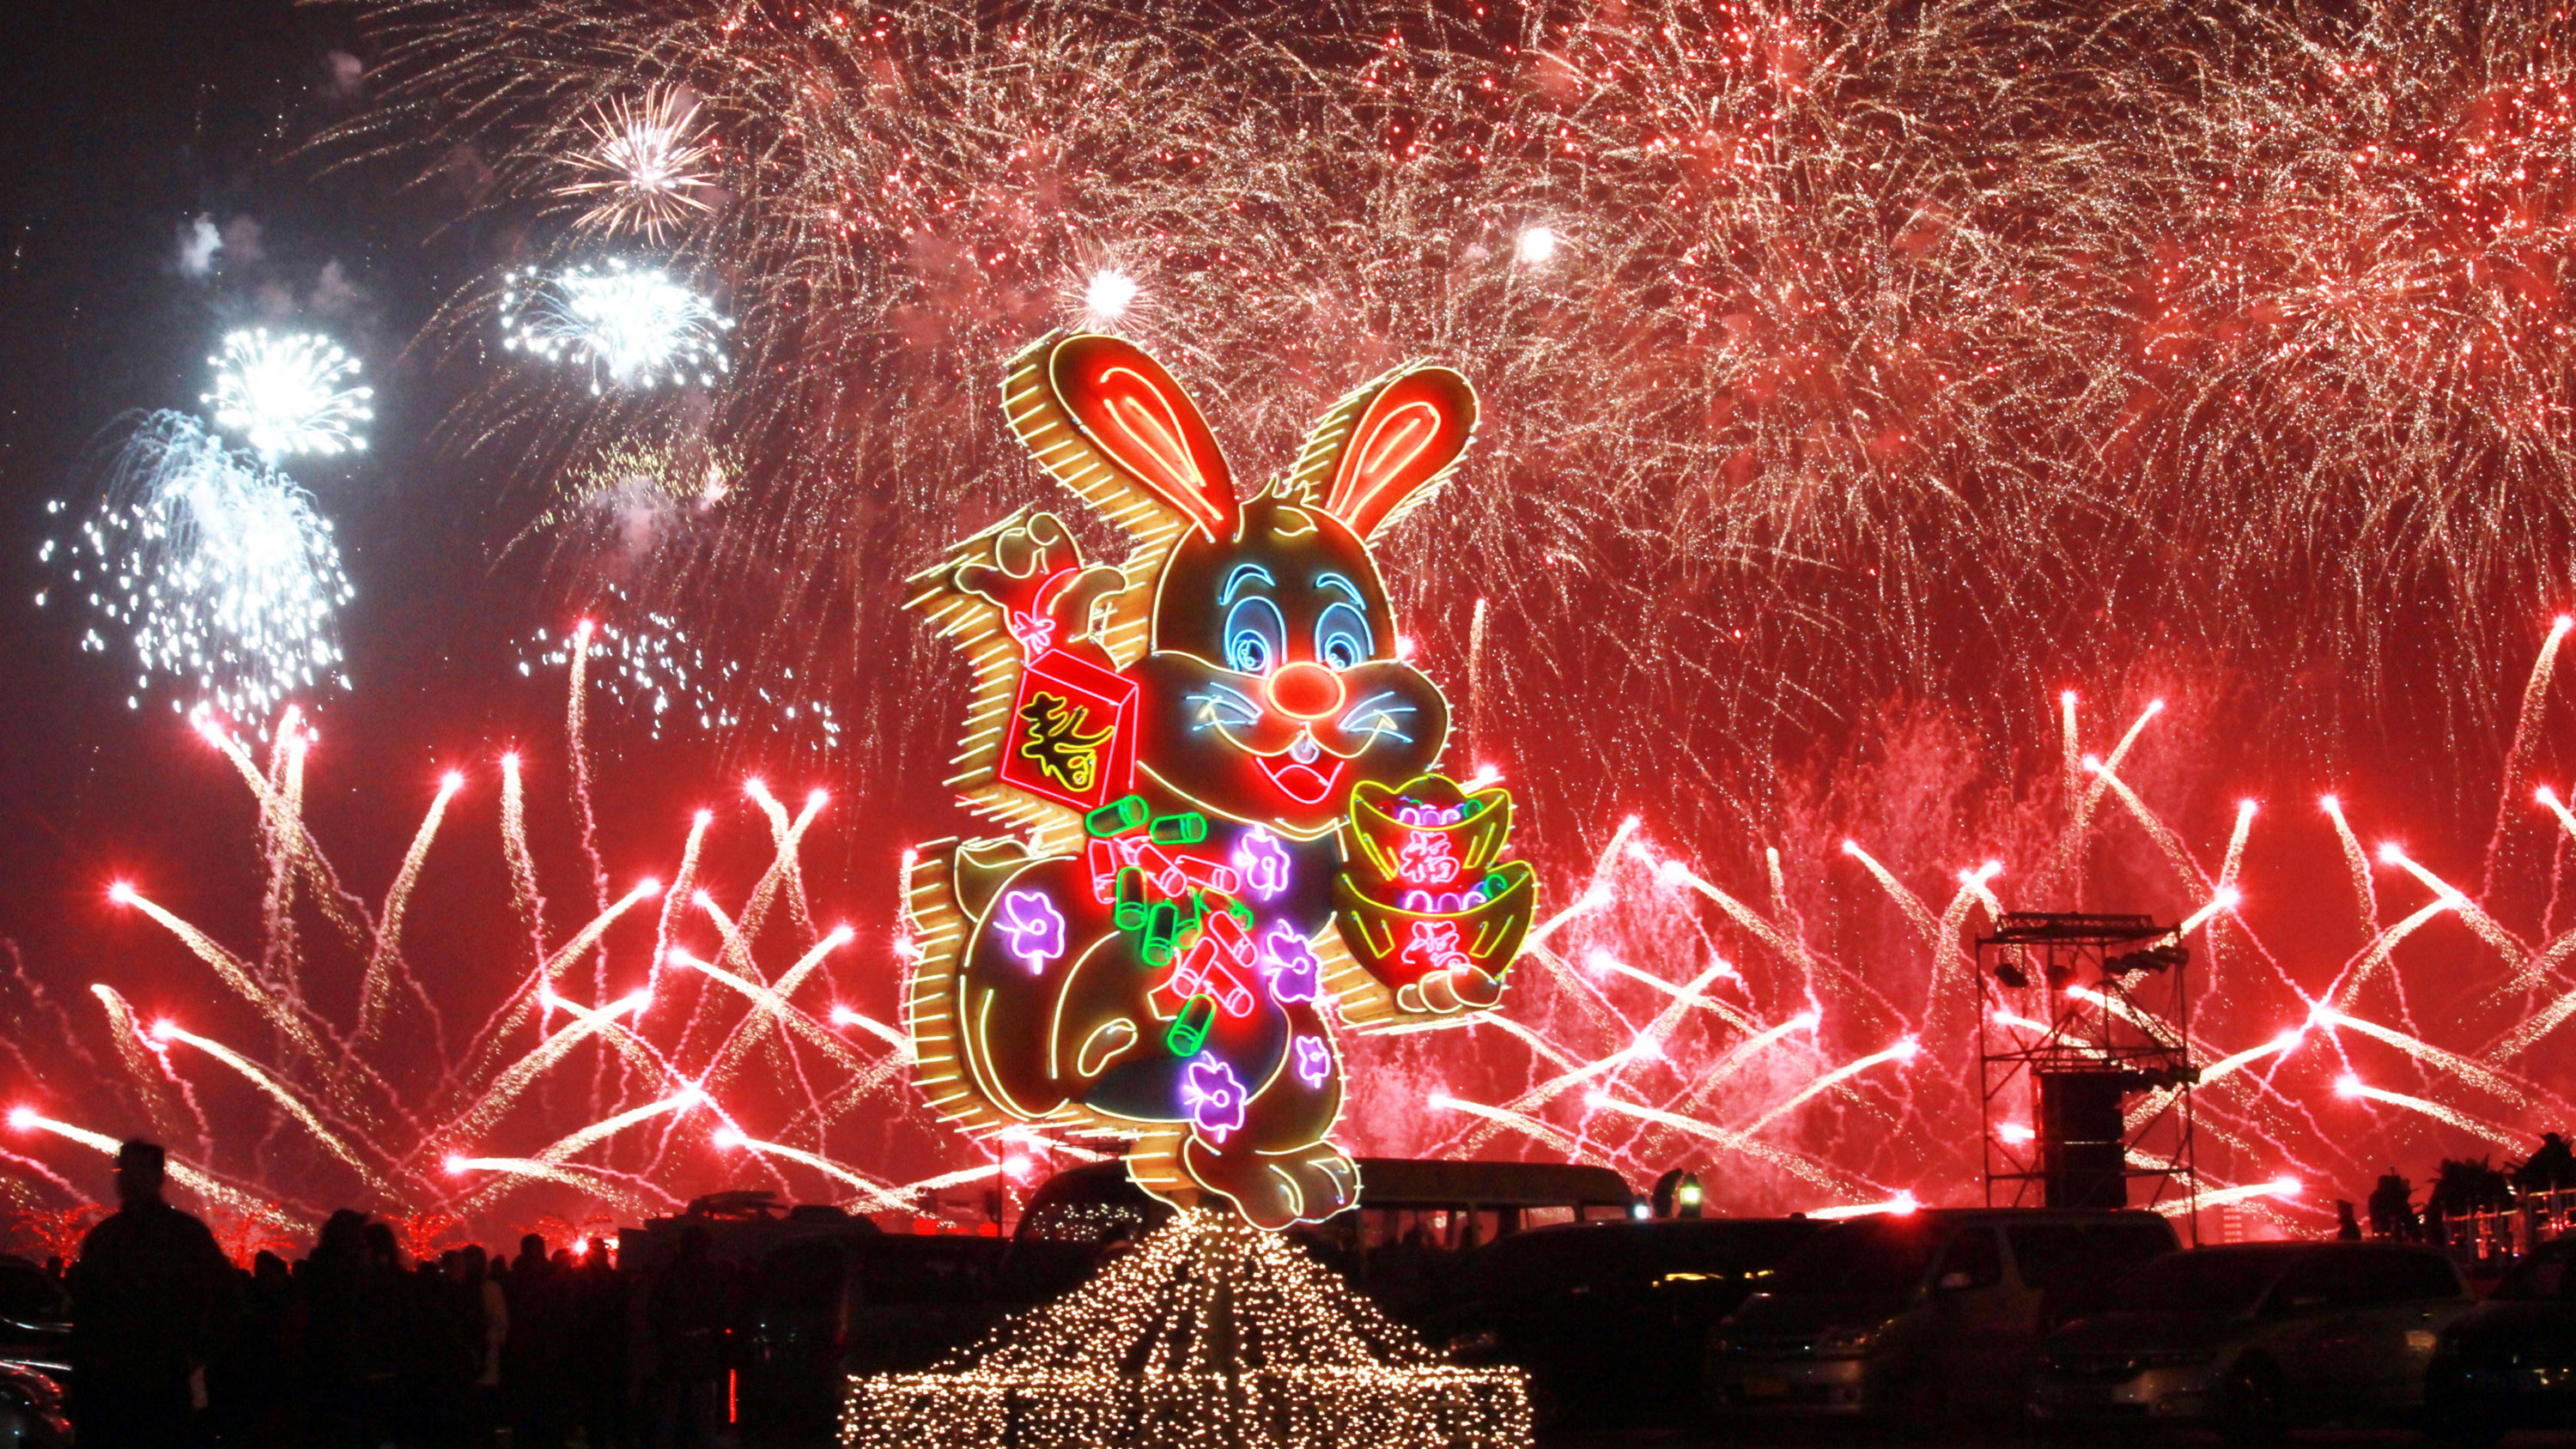 Fireworks are seen behind a neon-light rabbit in Dalian, China